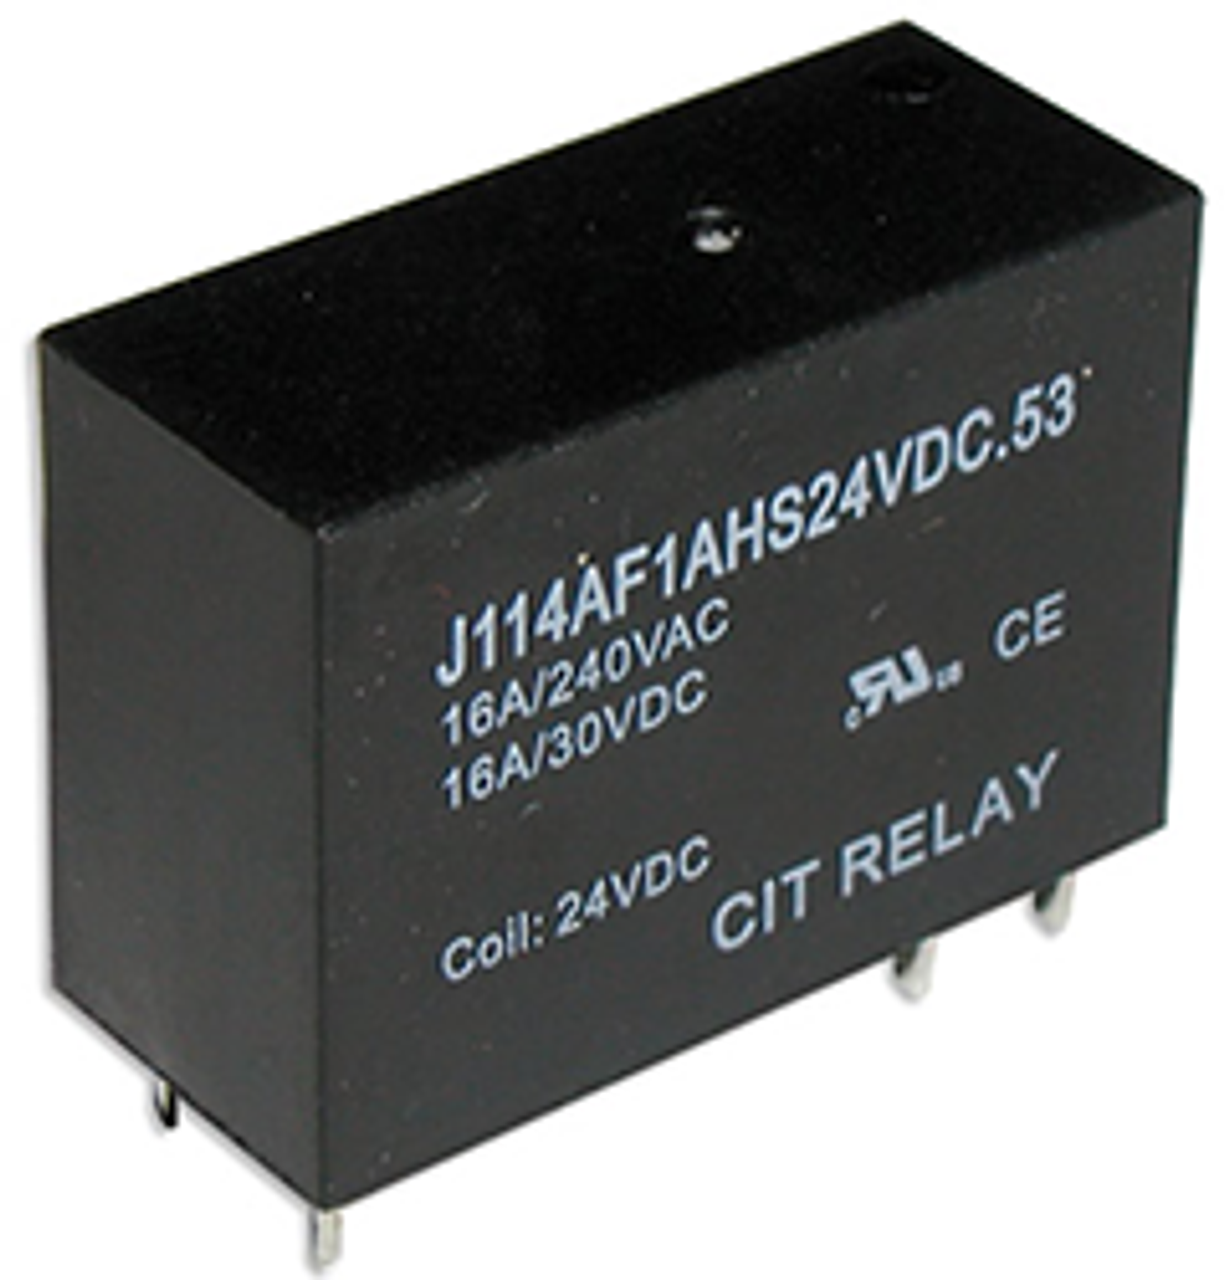 CIT Relay and Switch J114AF1AHS6VDC.53 Power Relays